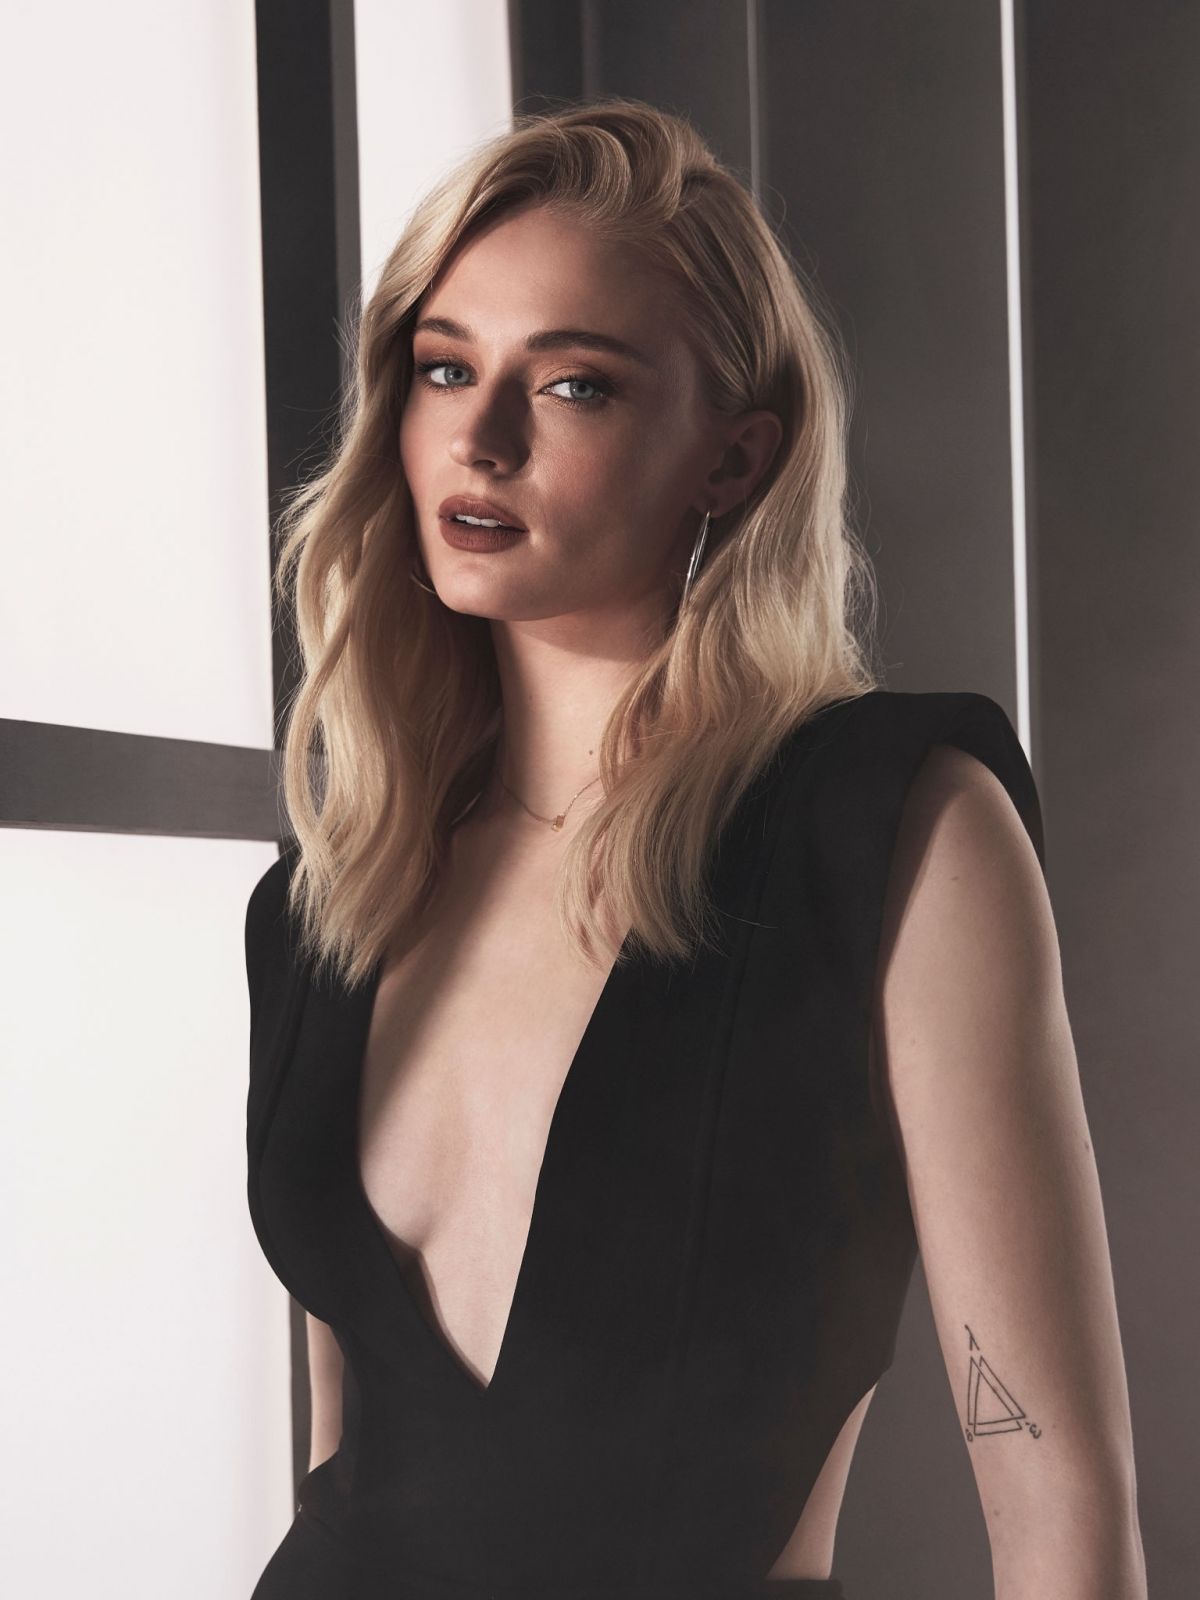 Sophie Turner Actress Photo 1358 Of 1395 Pics Wallpaper Photo